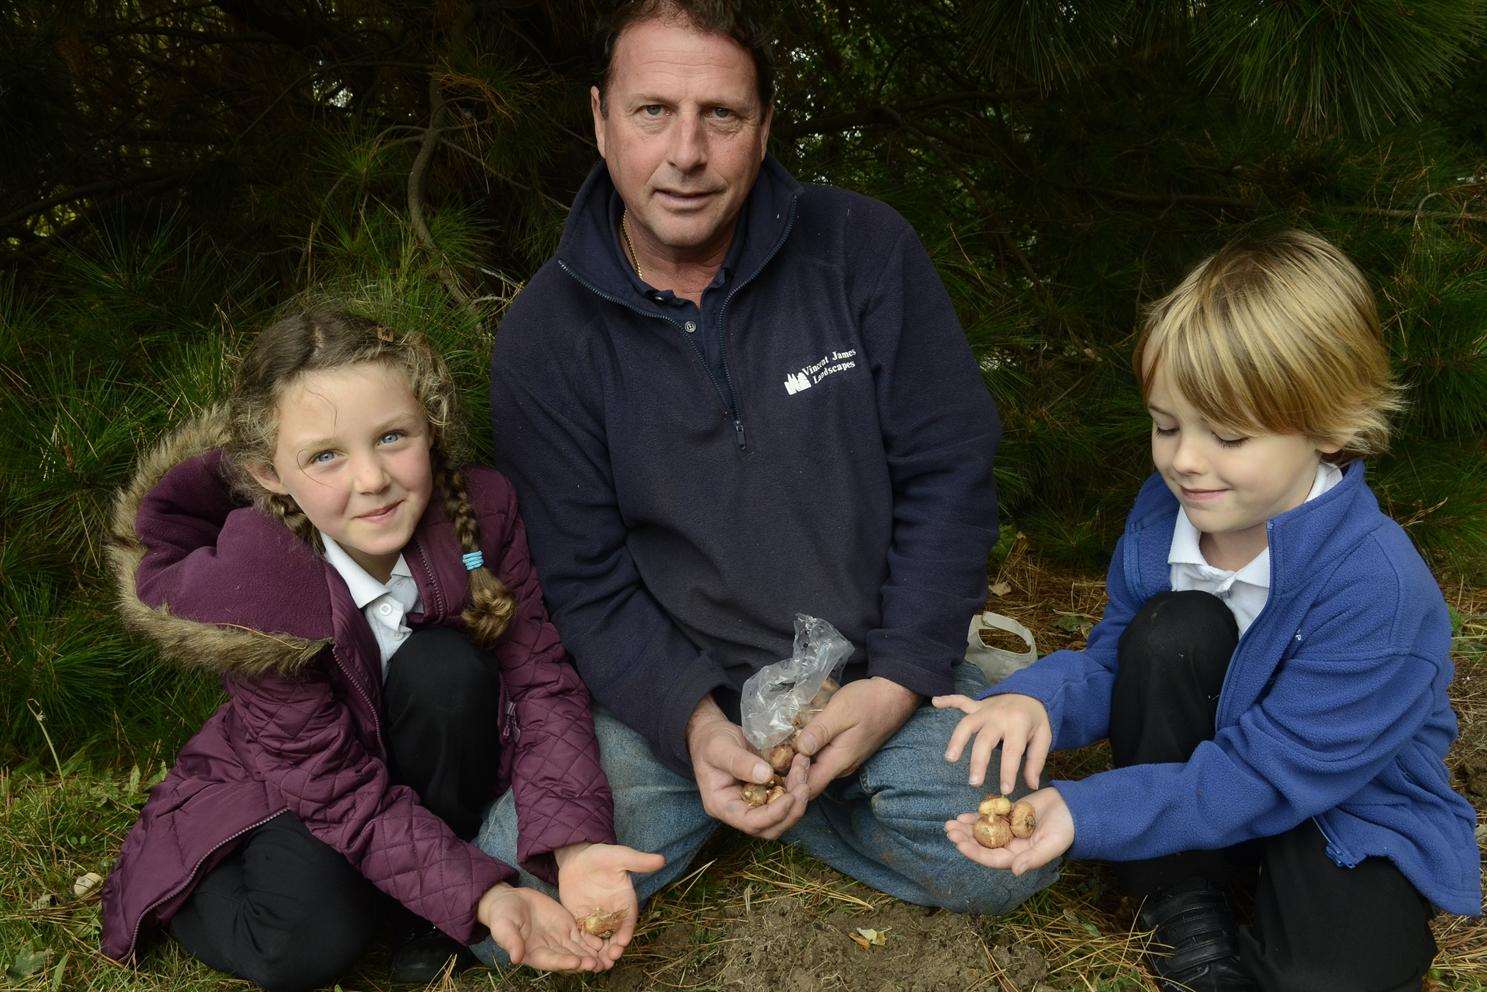 Leah Redsell and Cameron Mepstead, both five planting bulbs with Steve Merton of Vincent James Nurseries